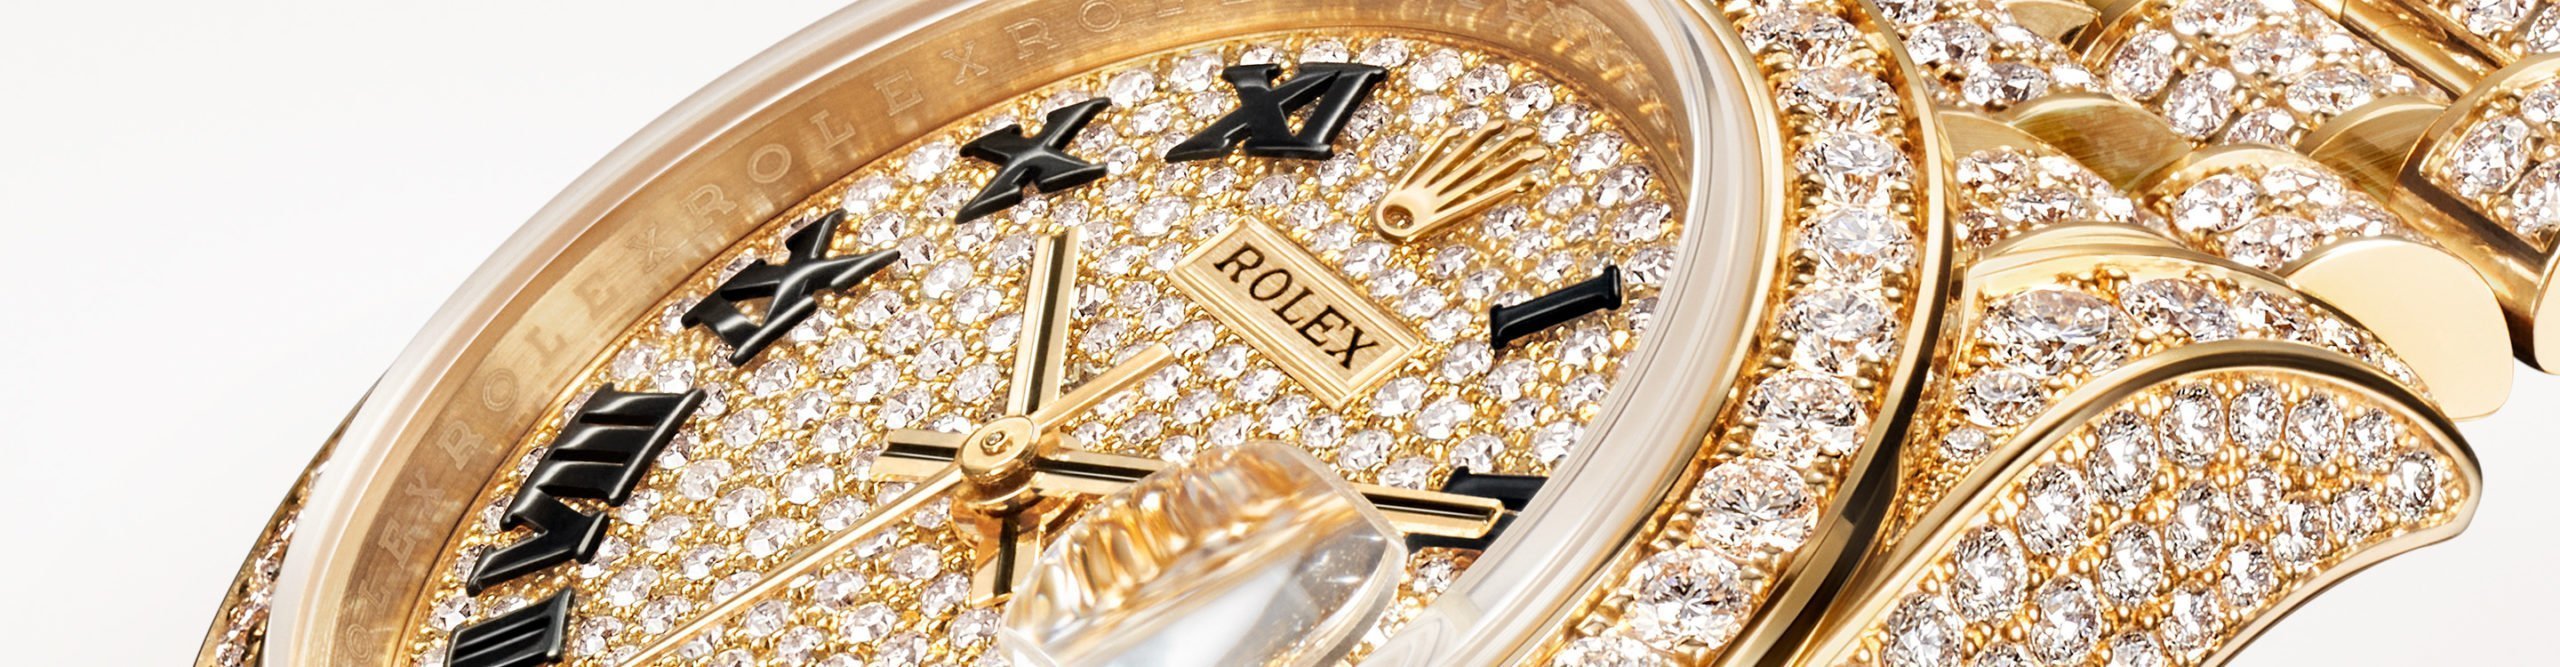 Experience a Rolex #